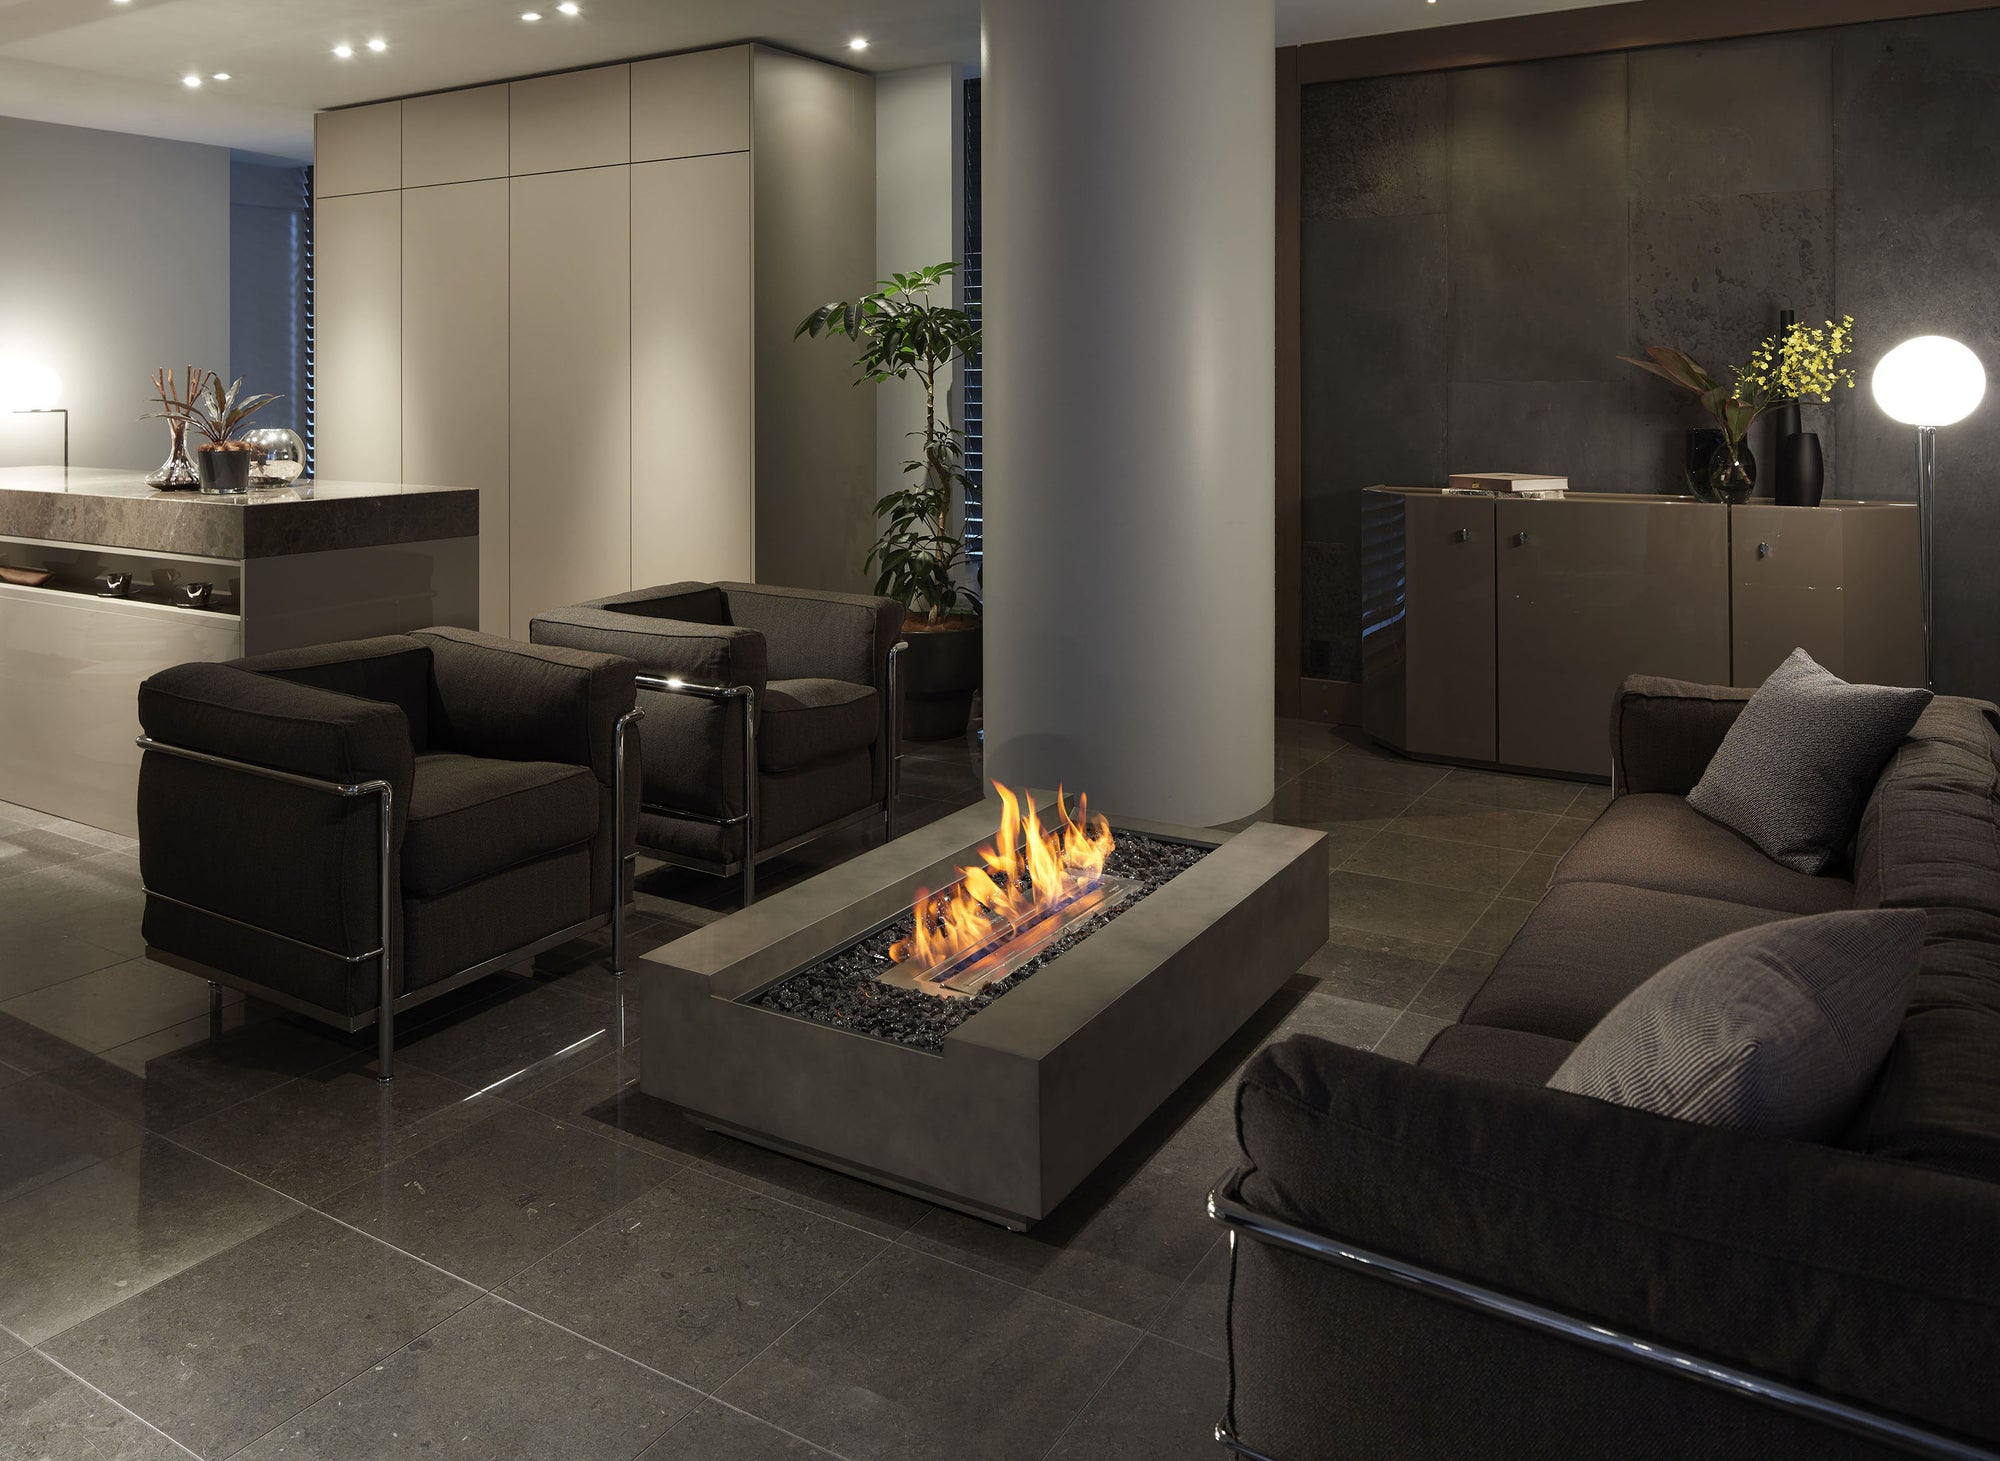 Indoor Fireplaces - What You Need to Know